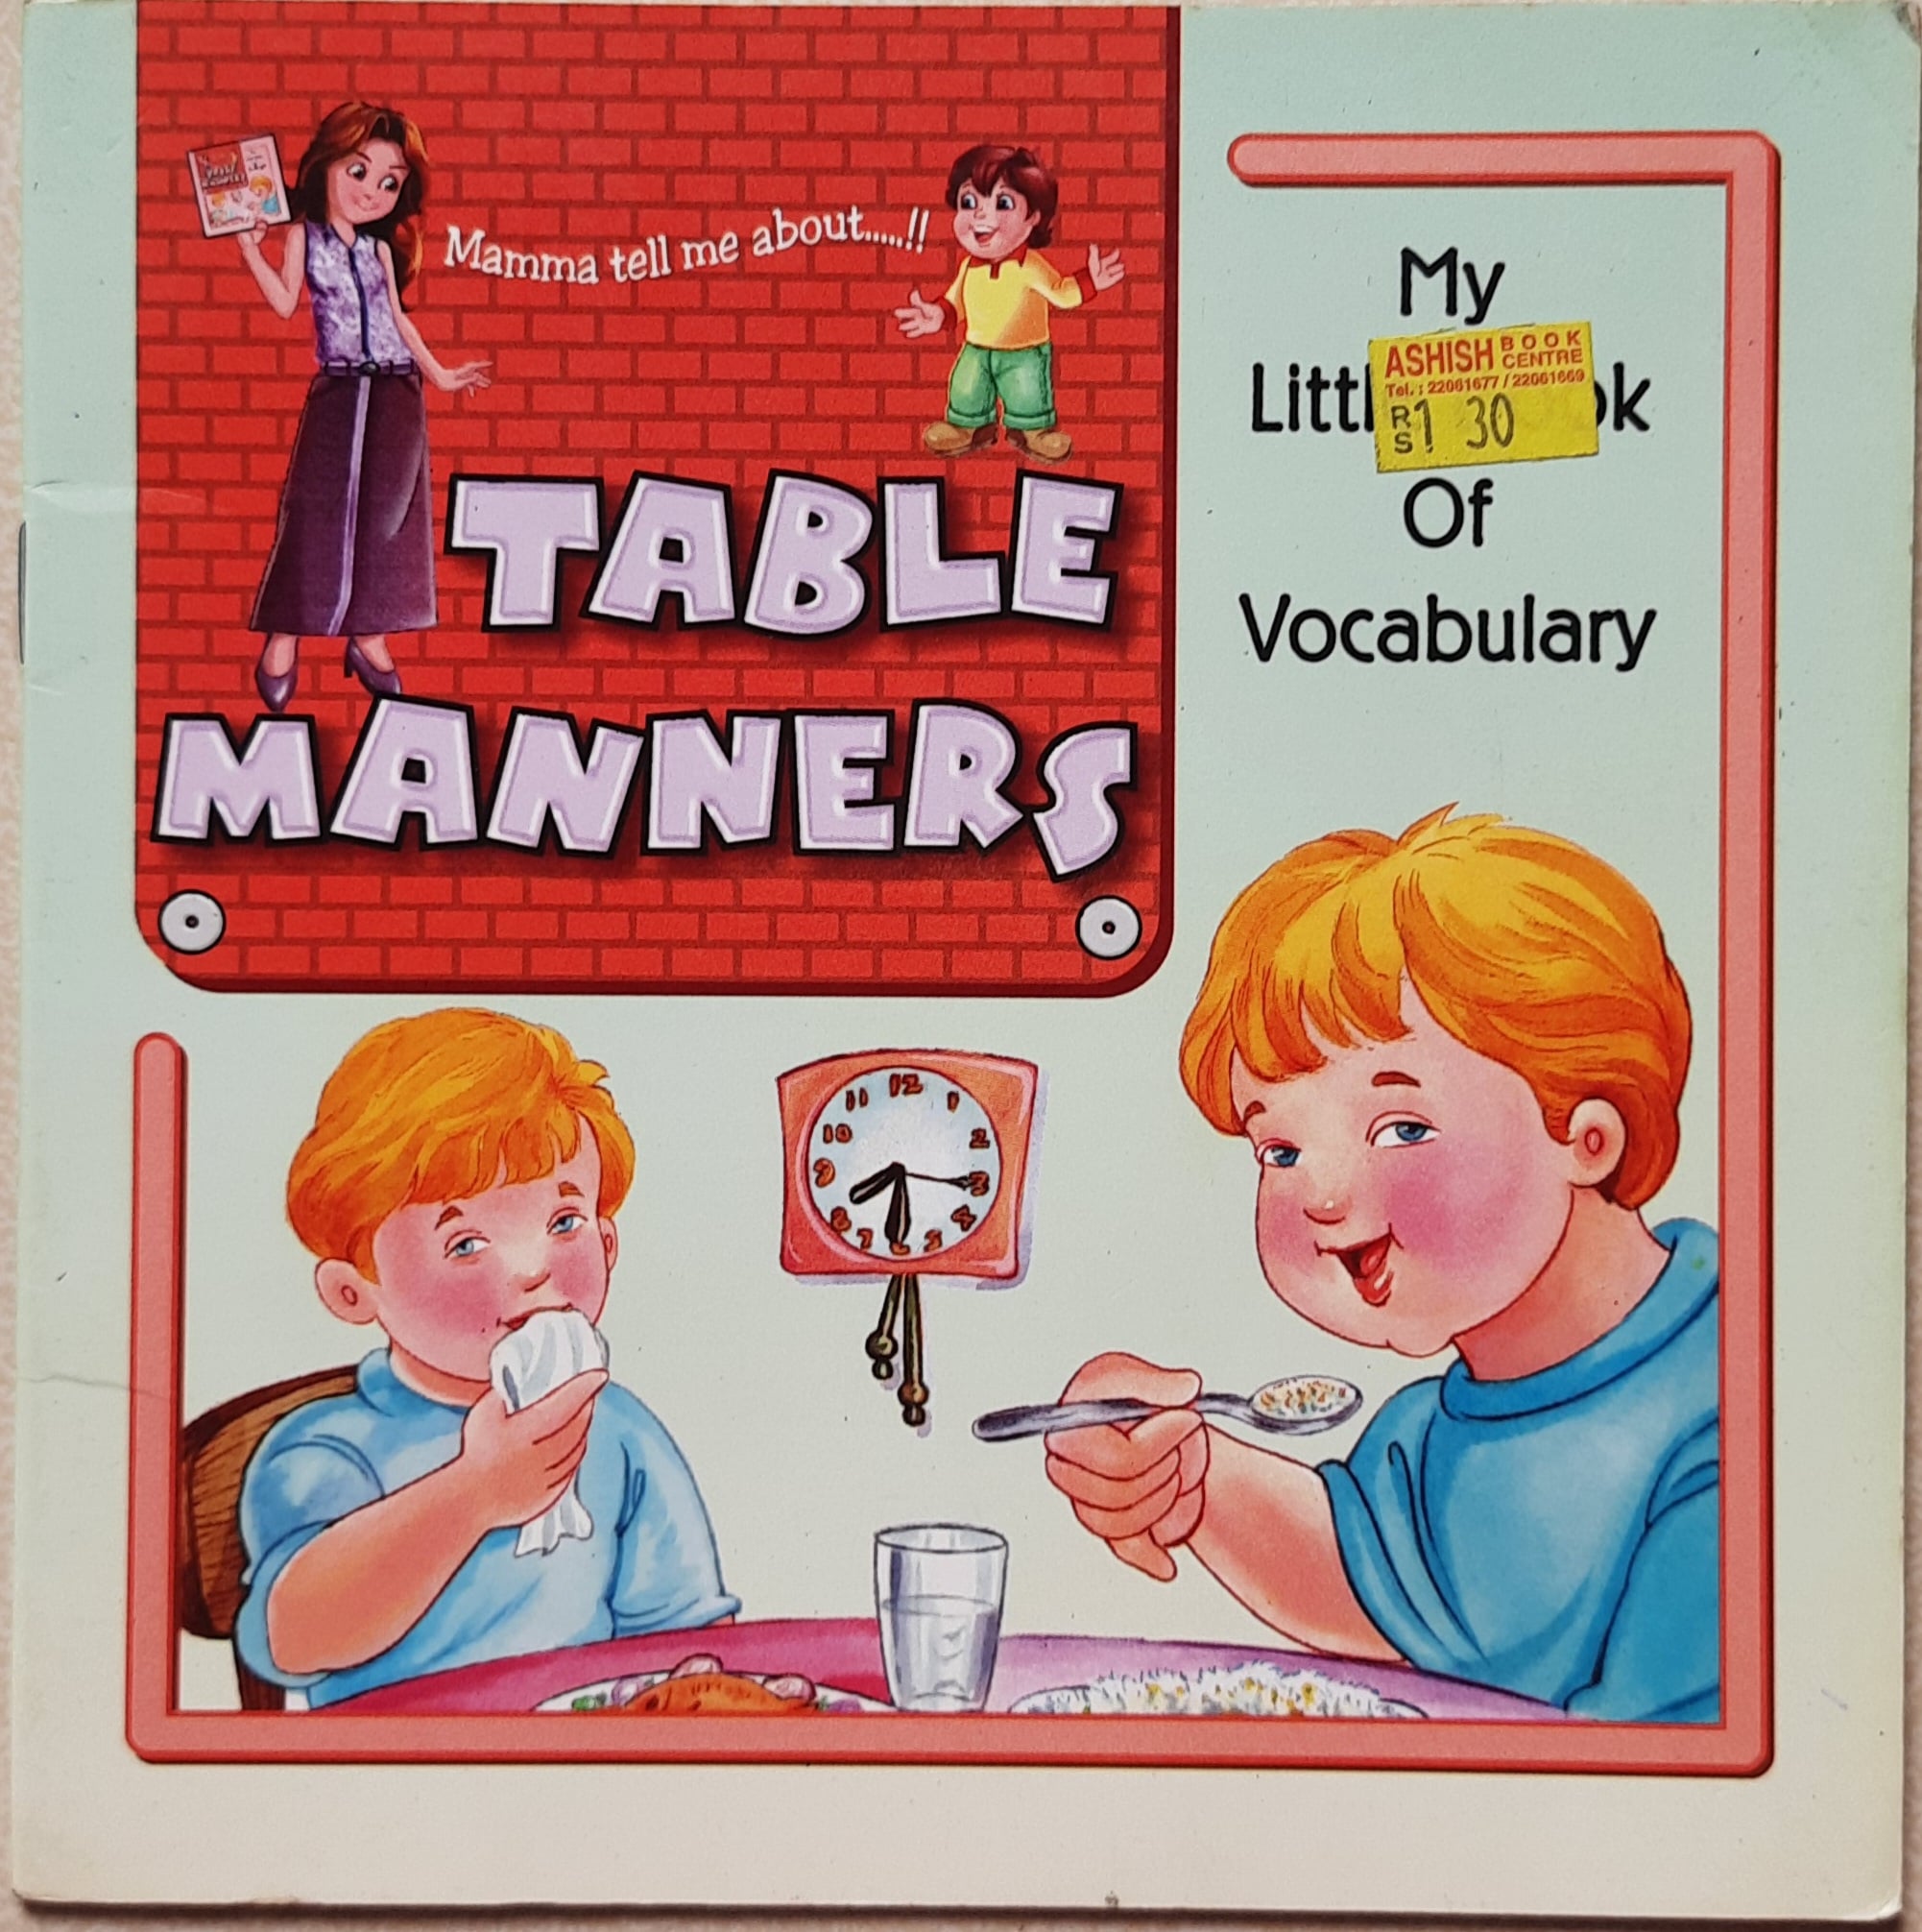 IMG : Mamma tell me about Table manners